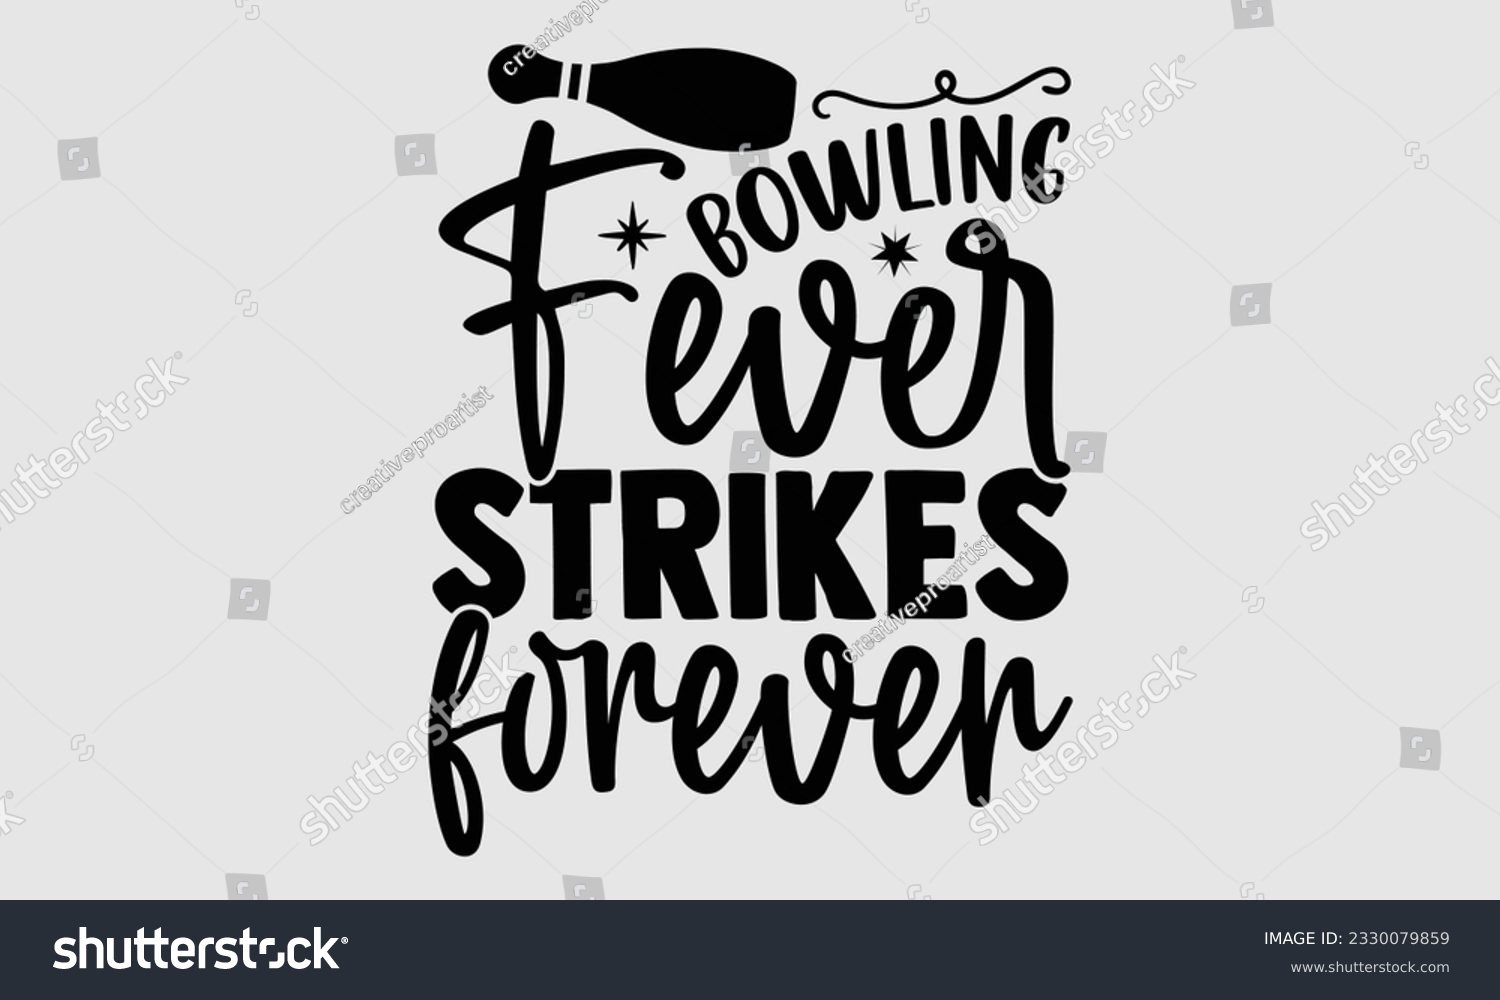 SVG of Bowling Fever Strikes Forever- Bowling t-shirt design, Handmade calligraphy vector Illustration for prints on SVG and bags, posters, greeting card template EPS svg